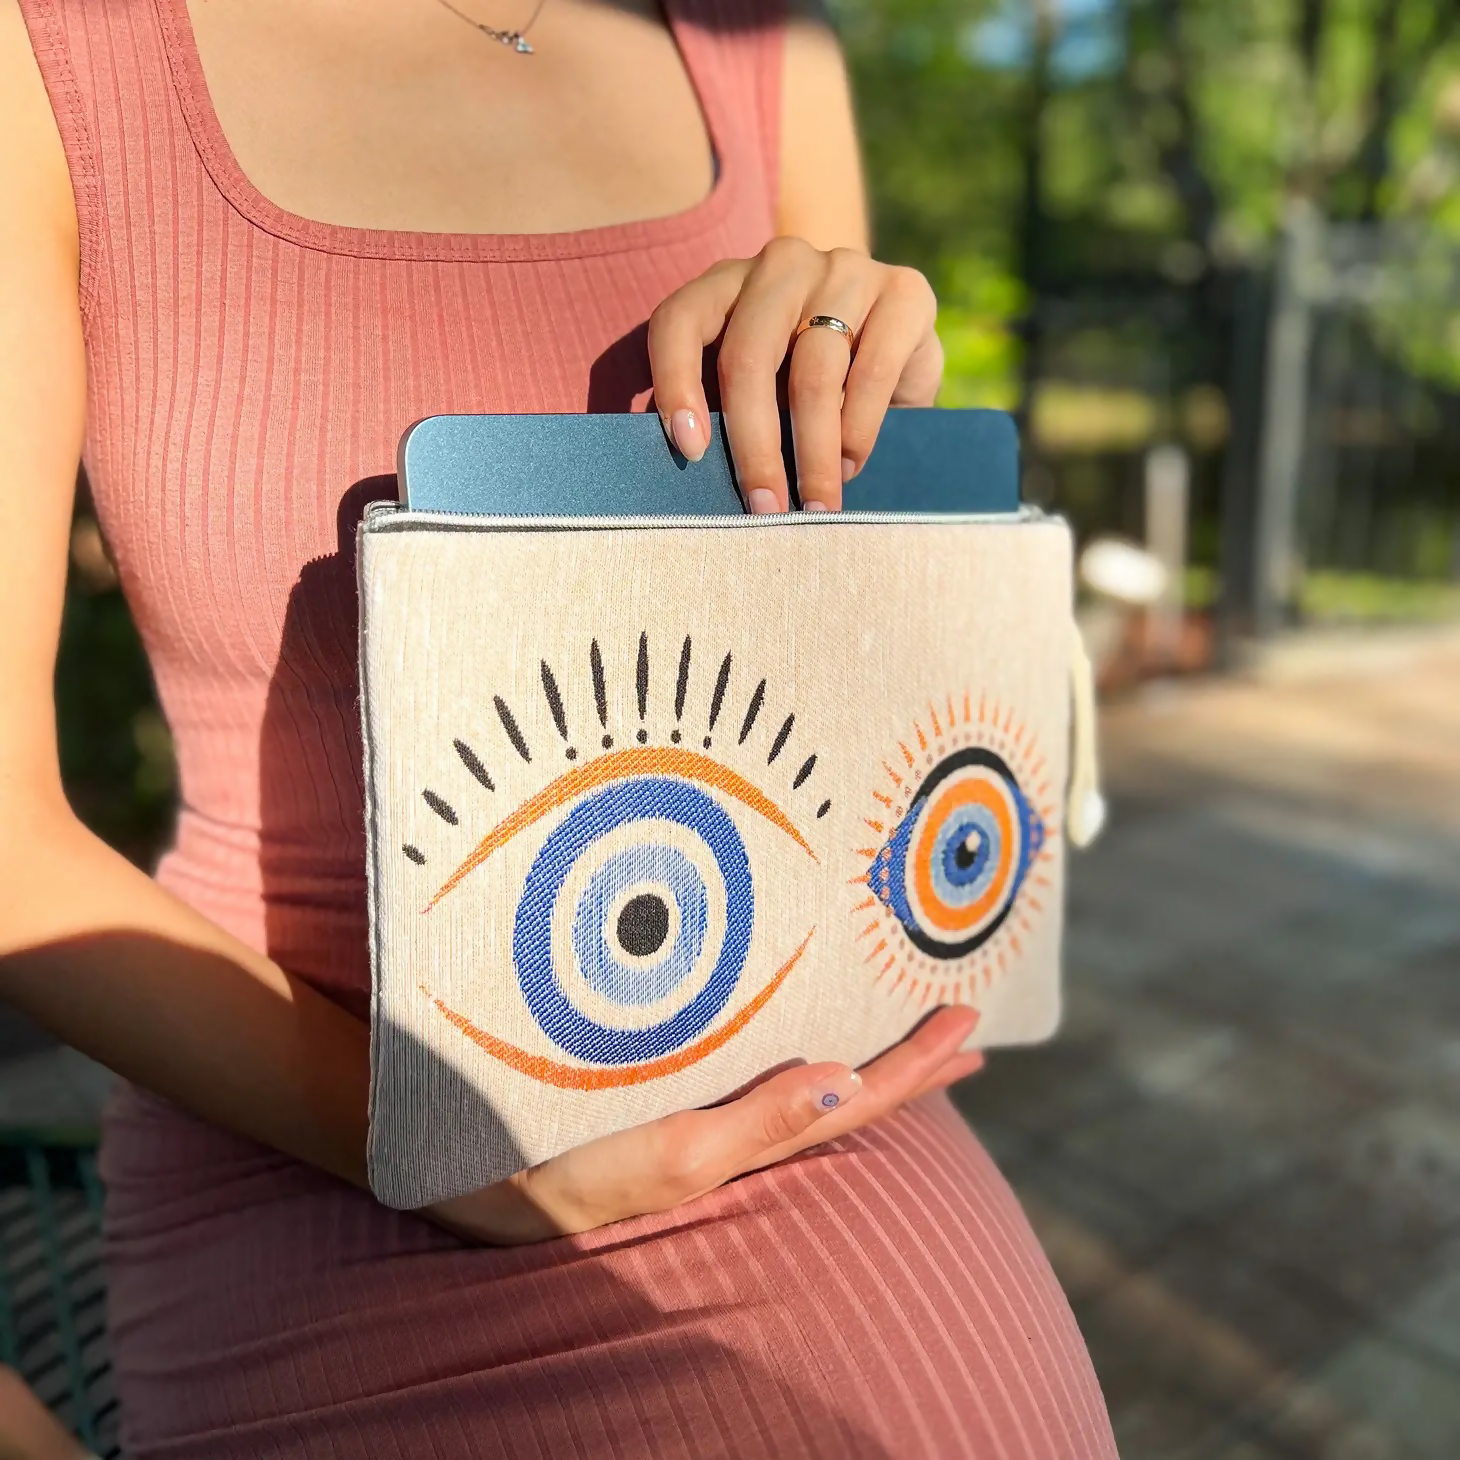 Evil Eyes Pouch